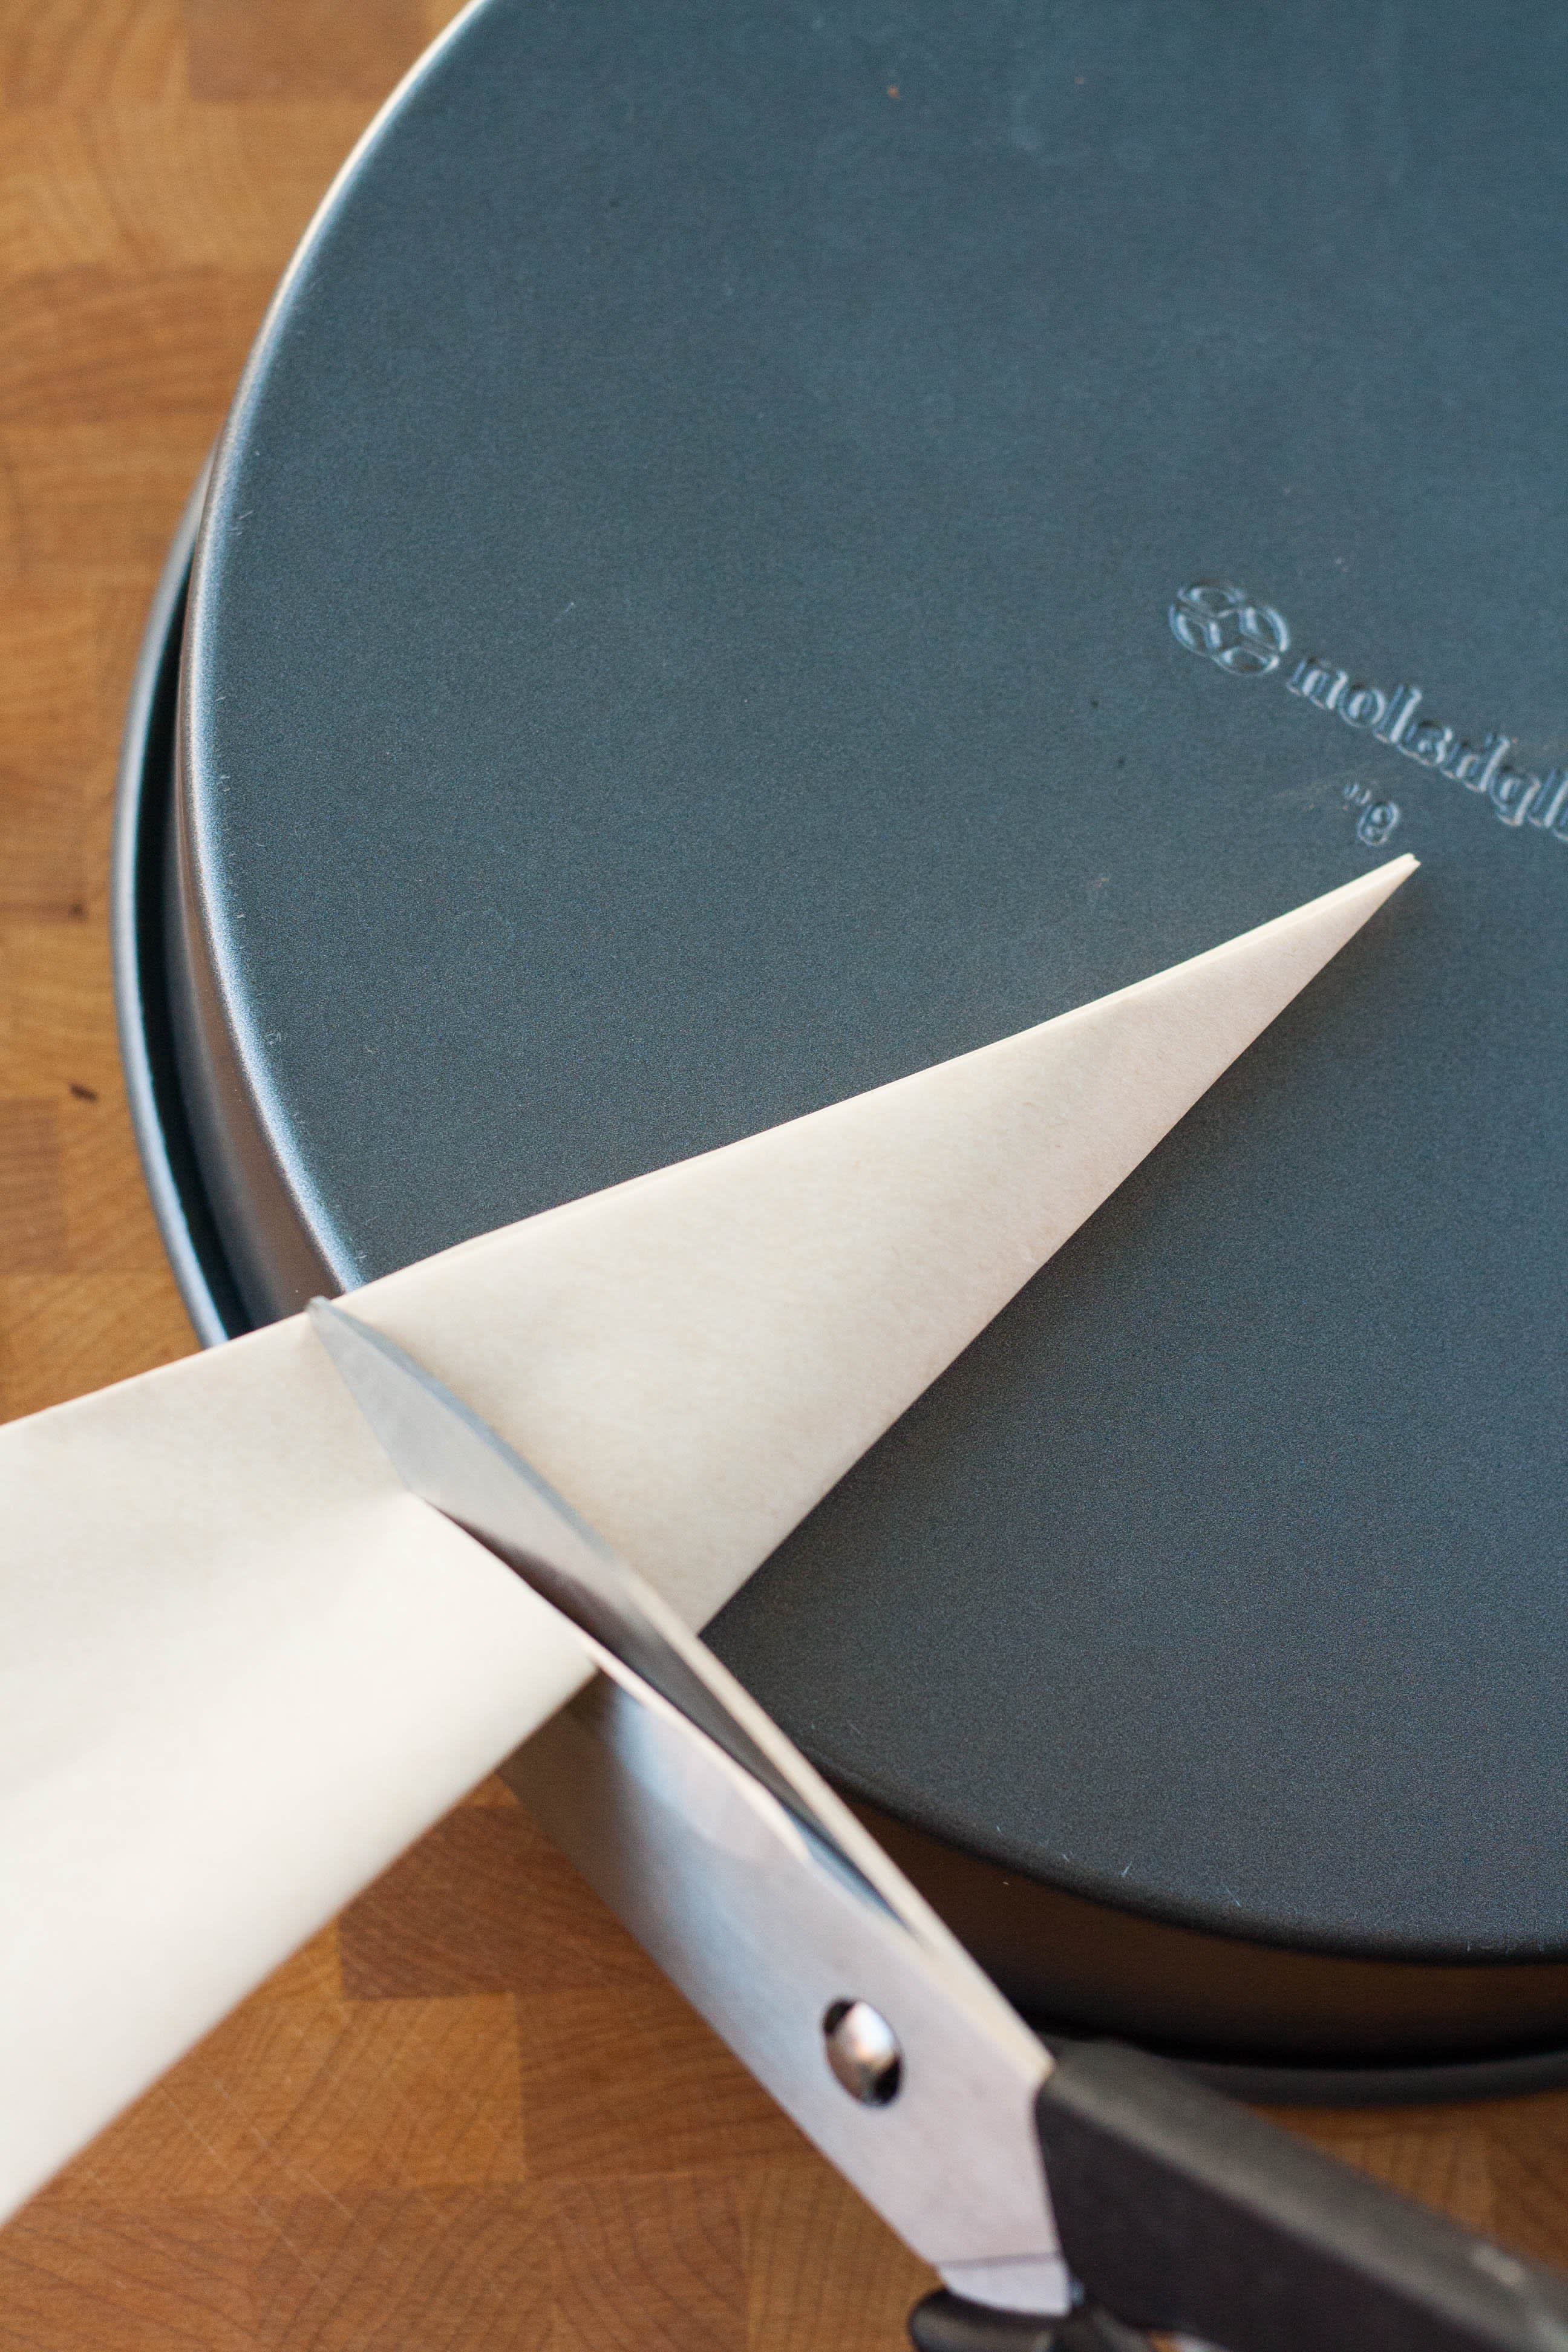 How to Line Cake Pans with Parchment Paper